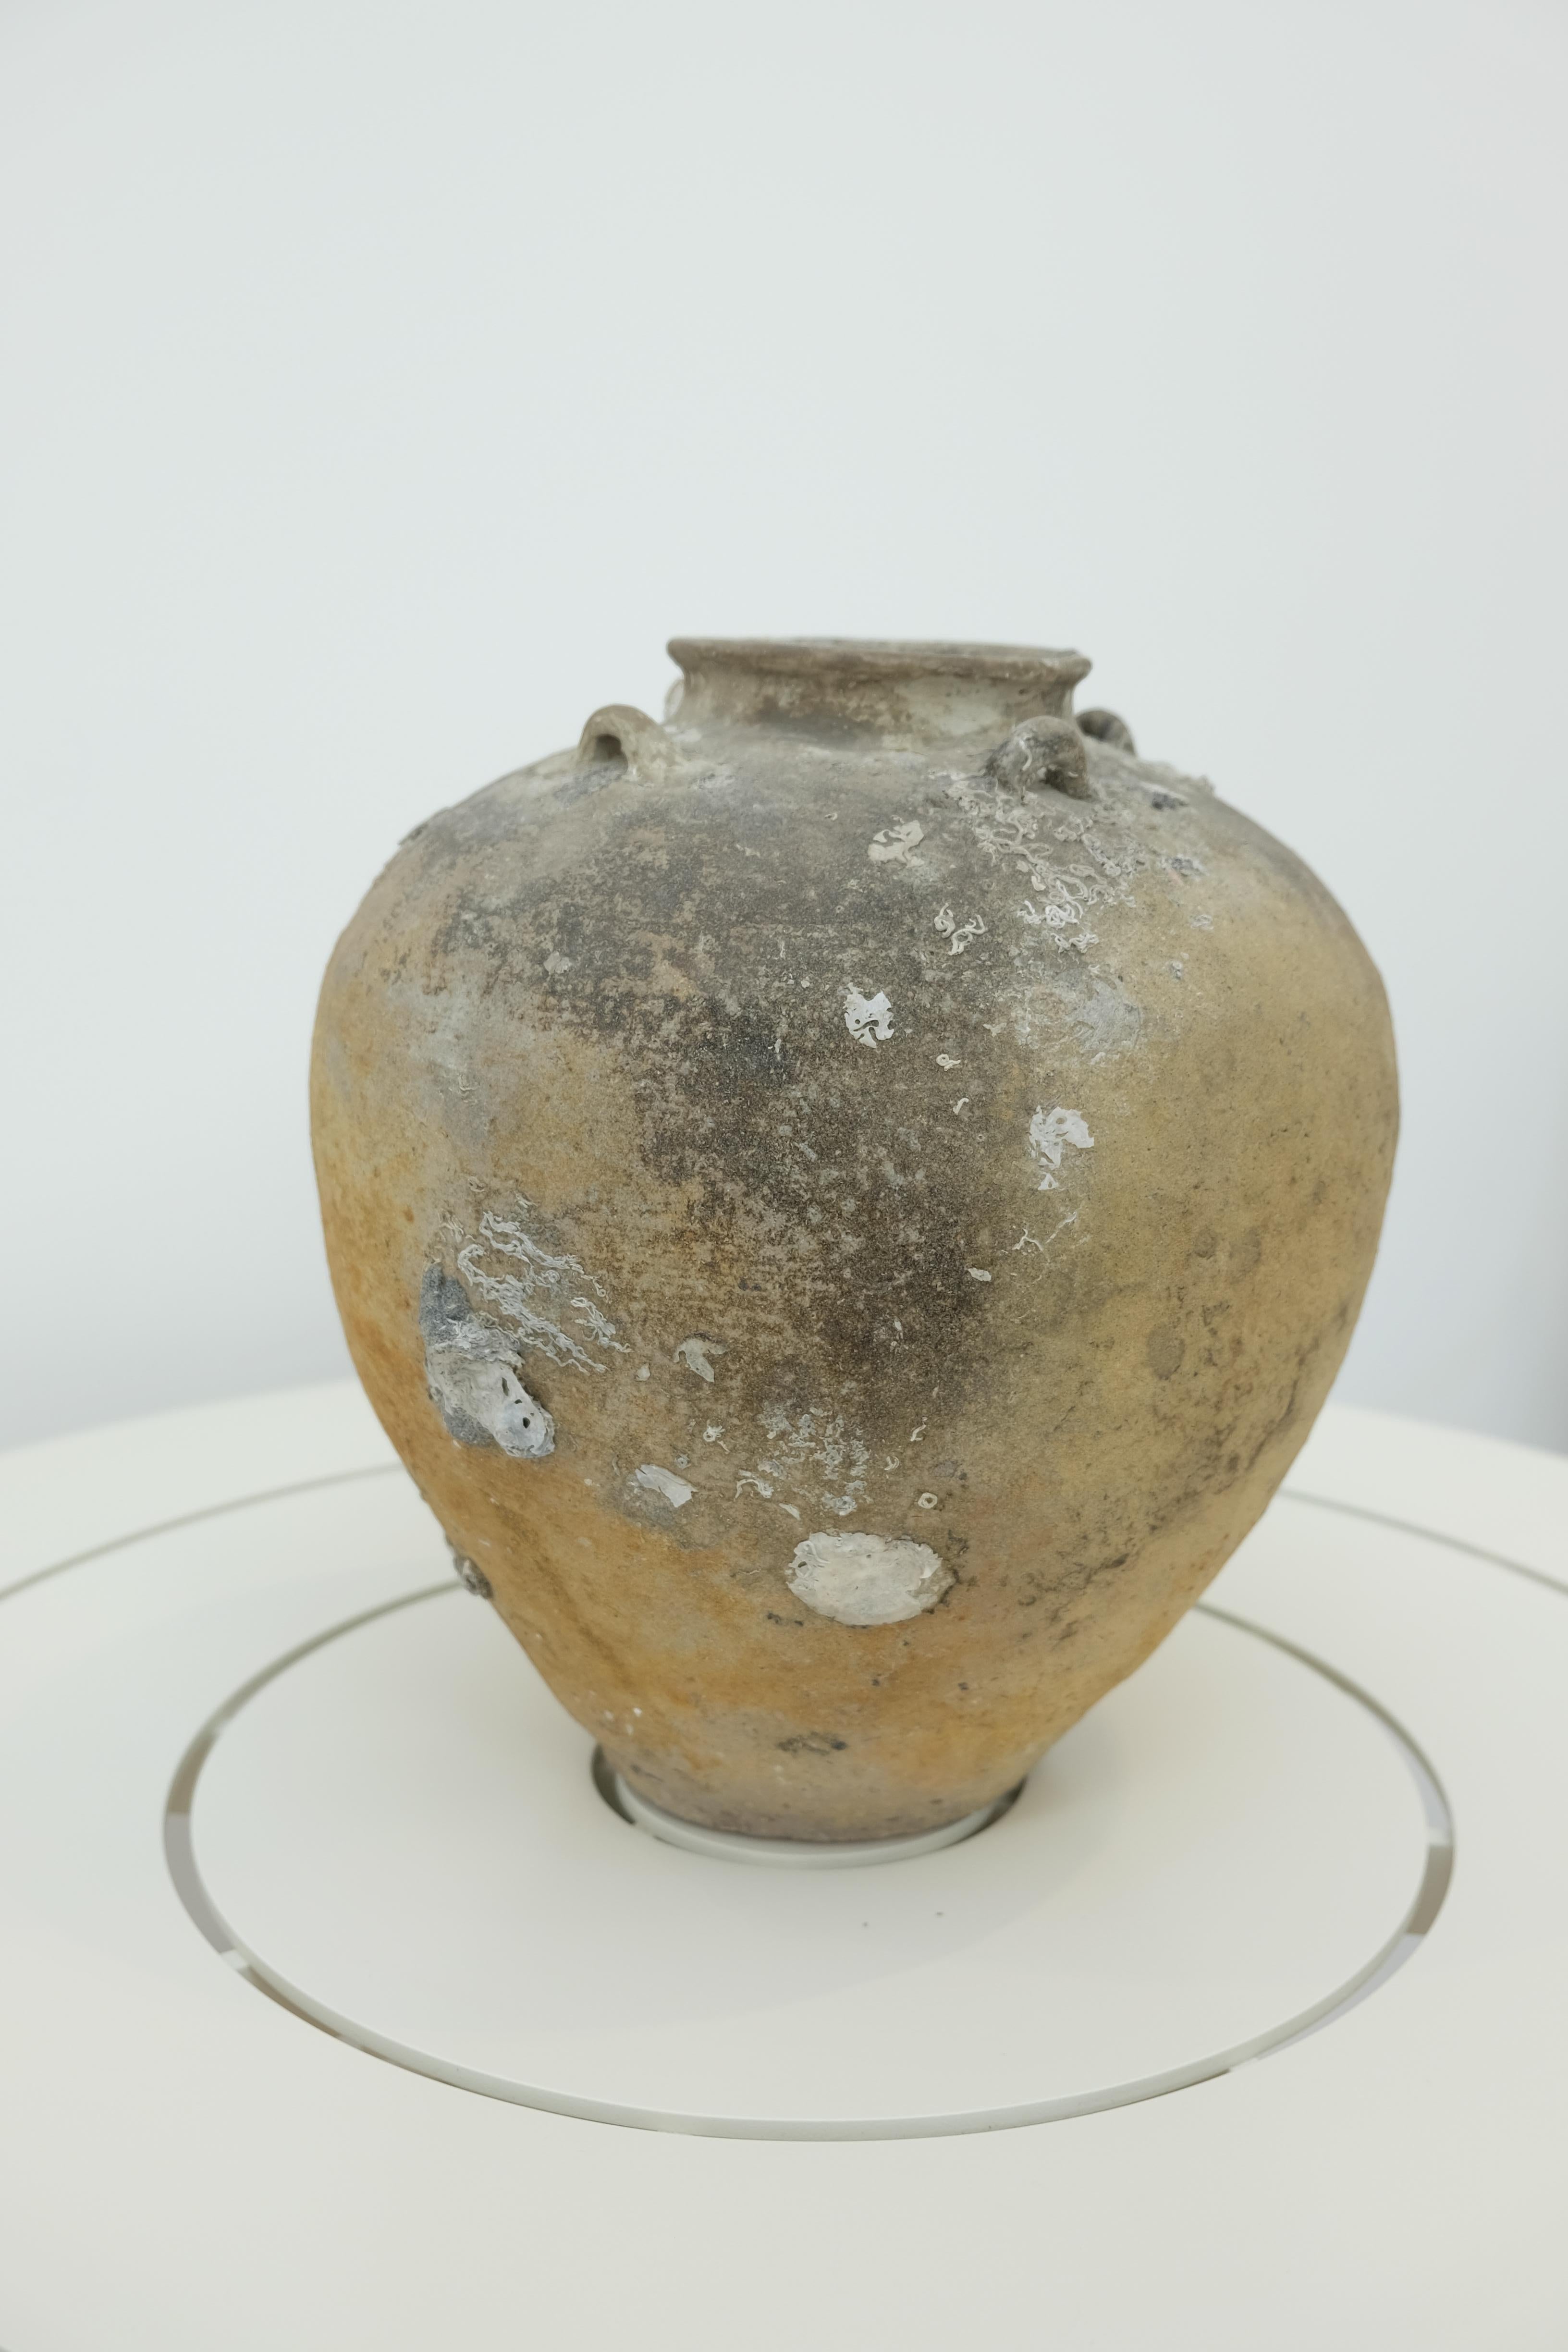 Ceramic Chinese Export Tsung Shipwreck Pot circa 1100, with a few large barnacles attached to its surface. Wonderful varied patina and encrustations. Perfect on a table top.